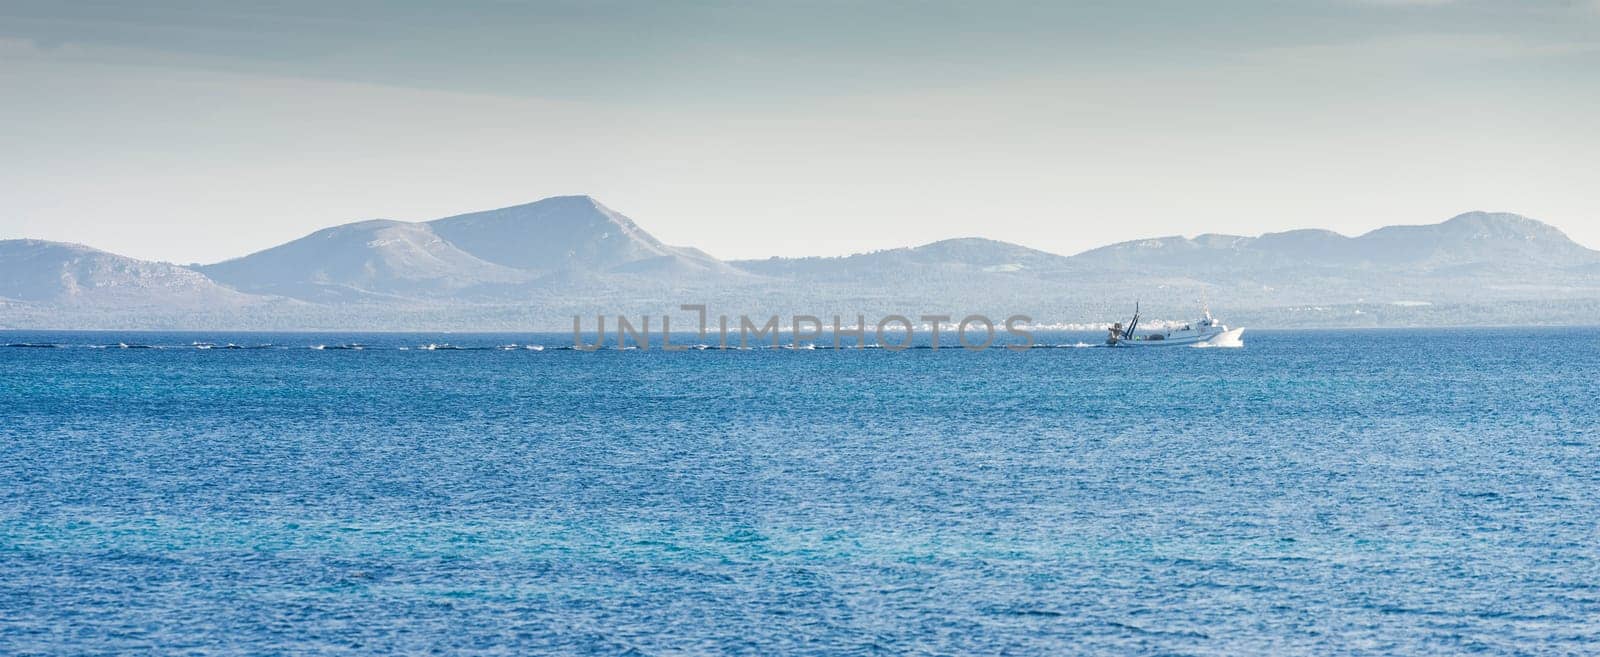 Navigating the Azure: Trawler at Sea with Mountain Backdrop by Juanjo39